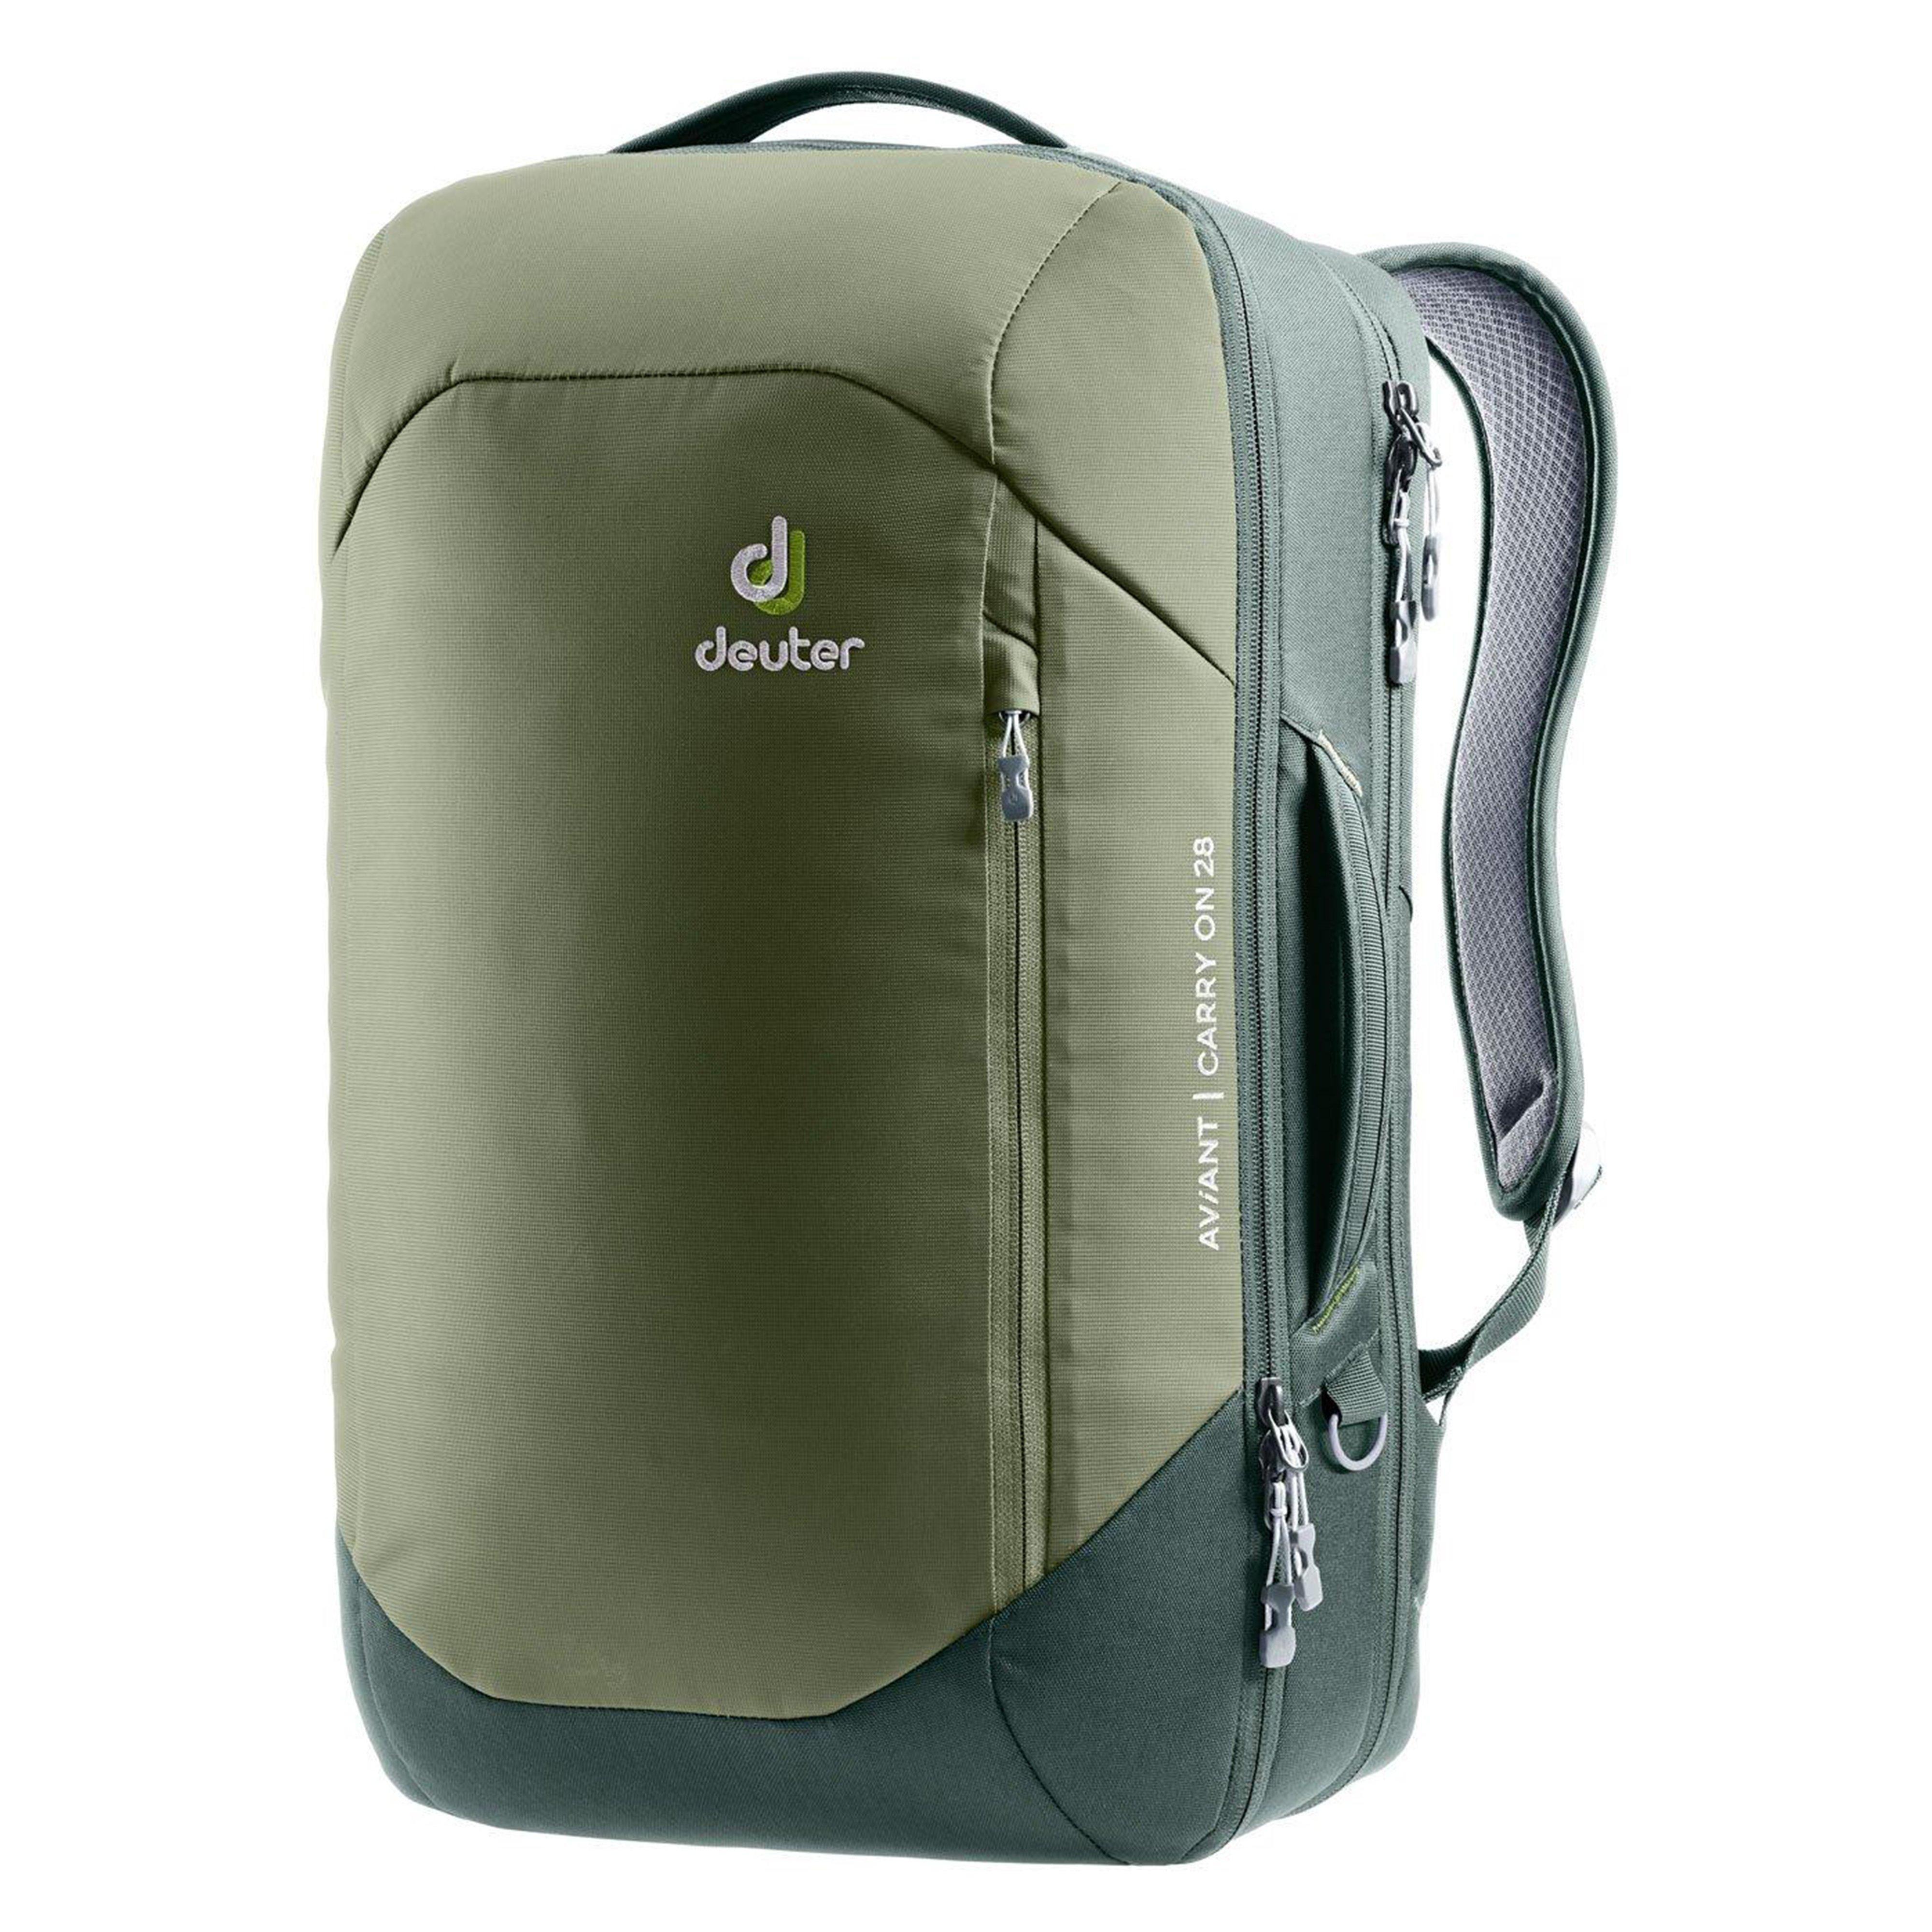 Deuter AViANT Carry On 28 Backpack Review